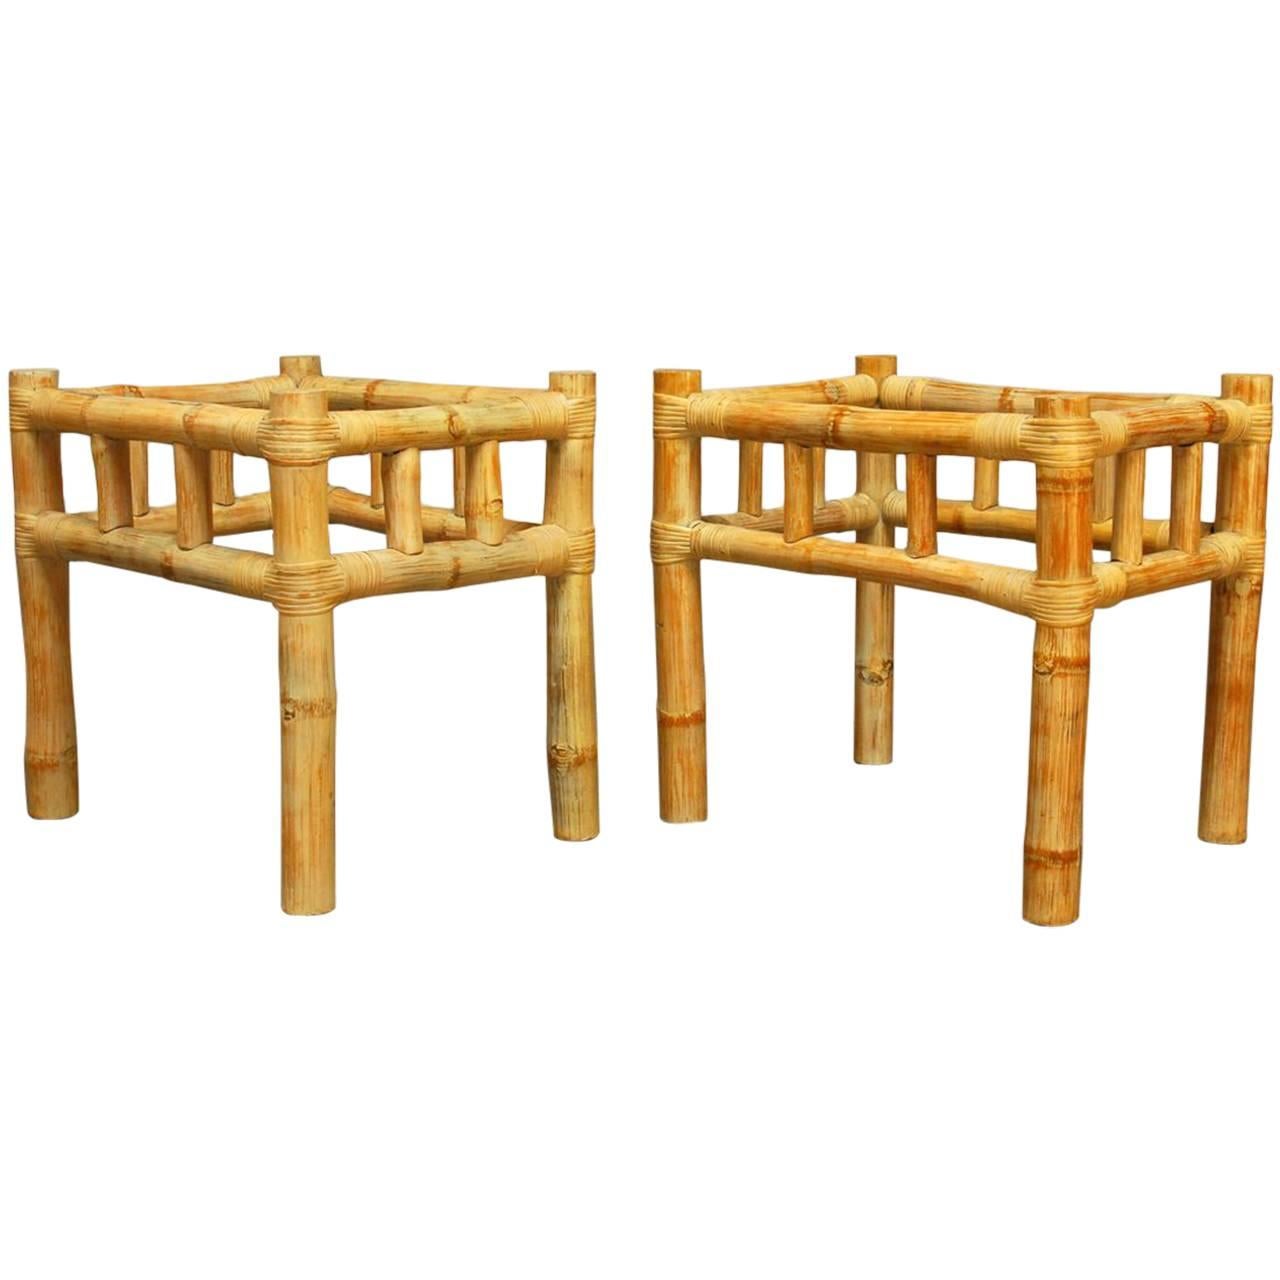 Pair of Organic Bamboo Side Tables Attributed to Ralph Lauren 